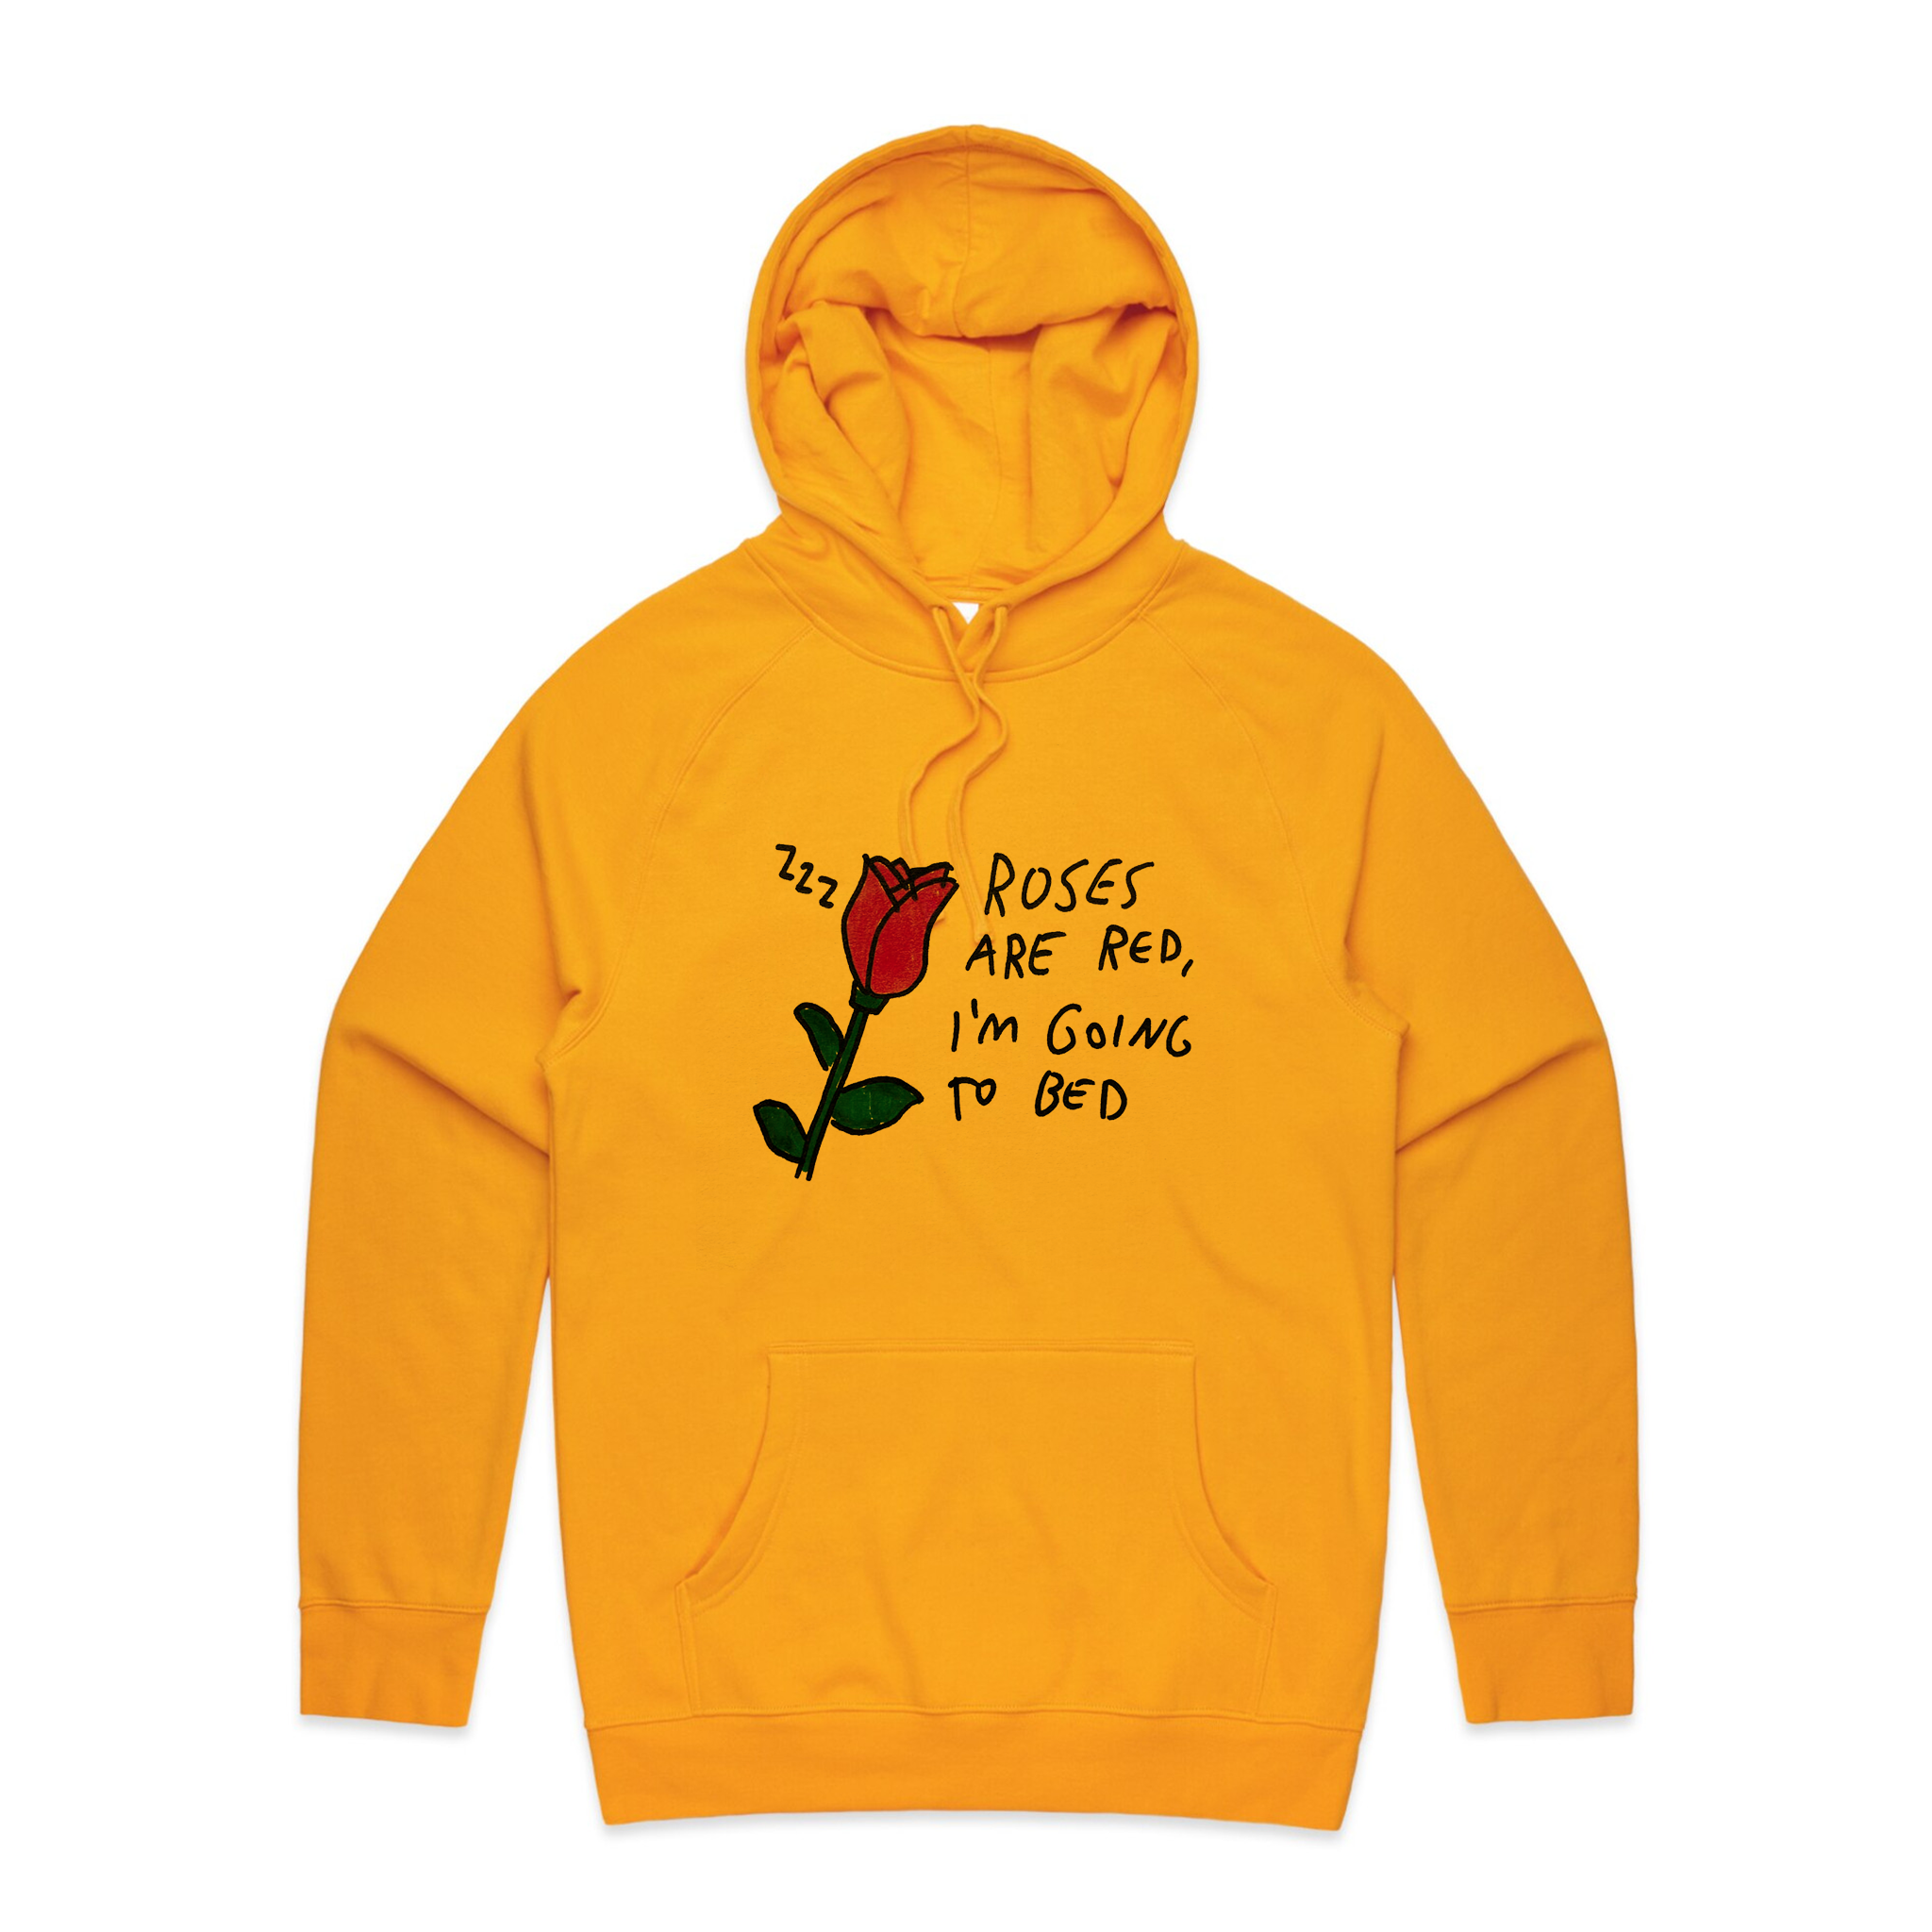 Roses Are Red Hoodie